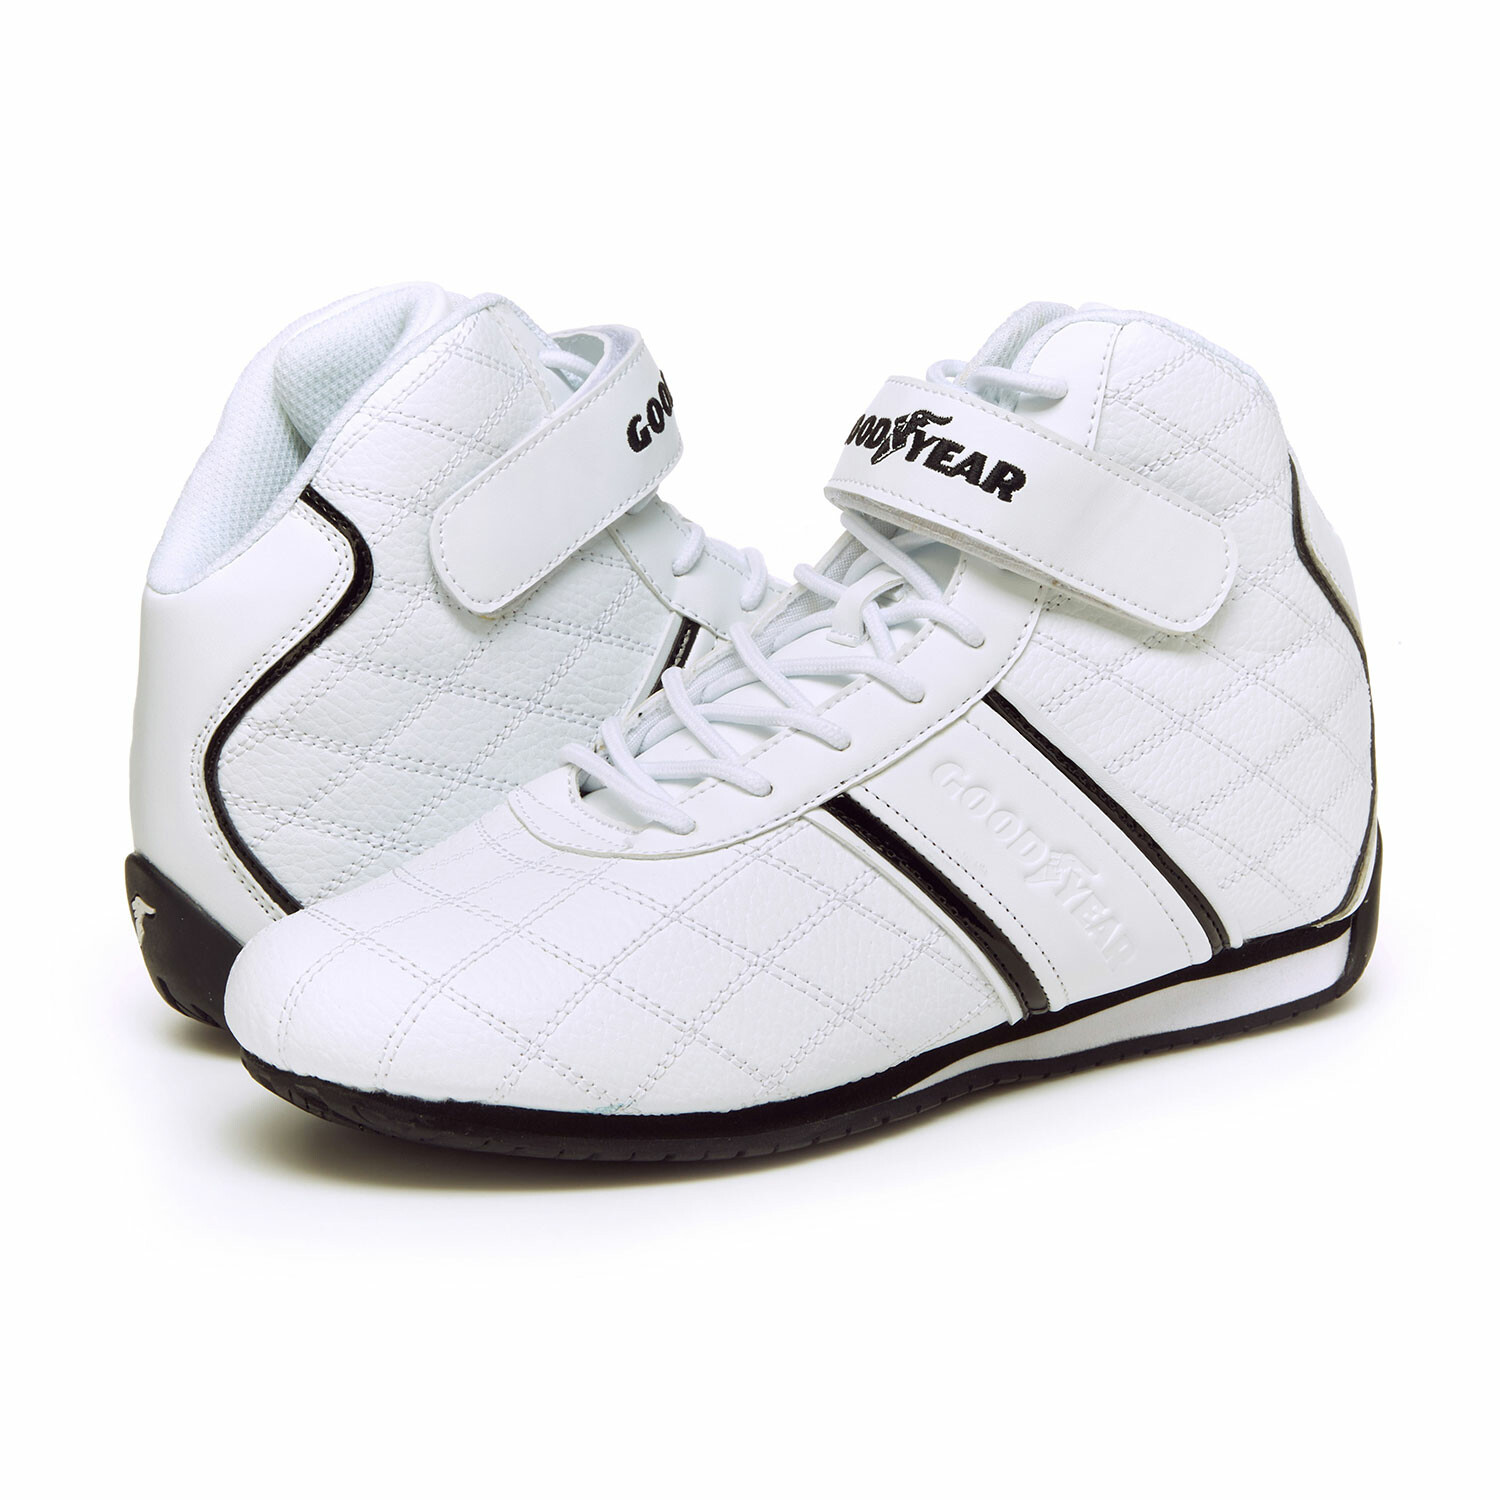 Clutch // White + Black (12M) - Goodyear Driving Shoes - Touch of Modern